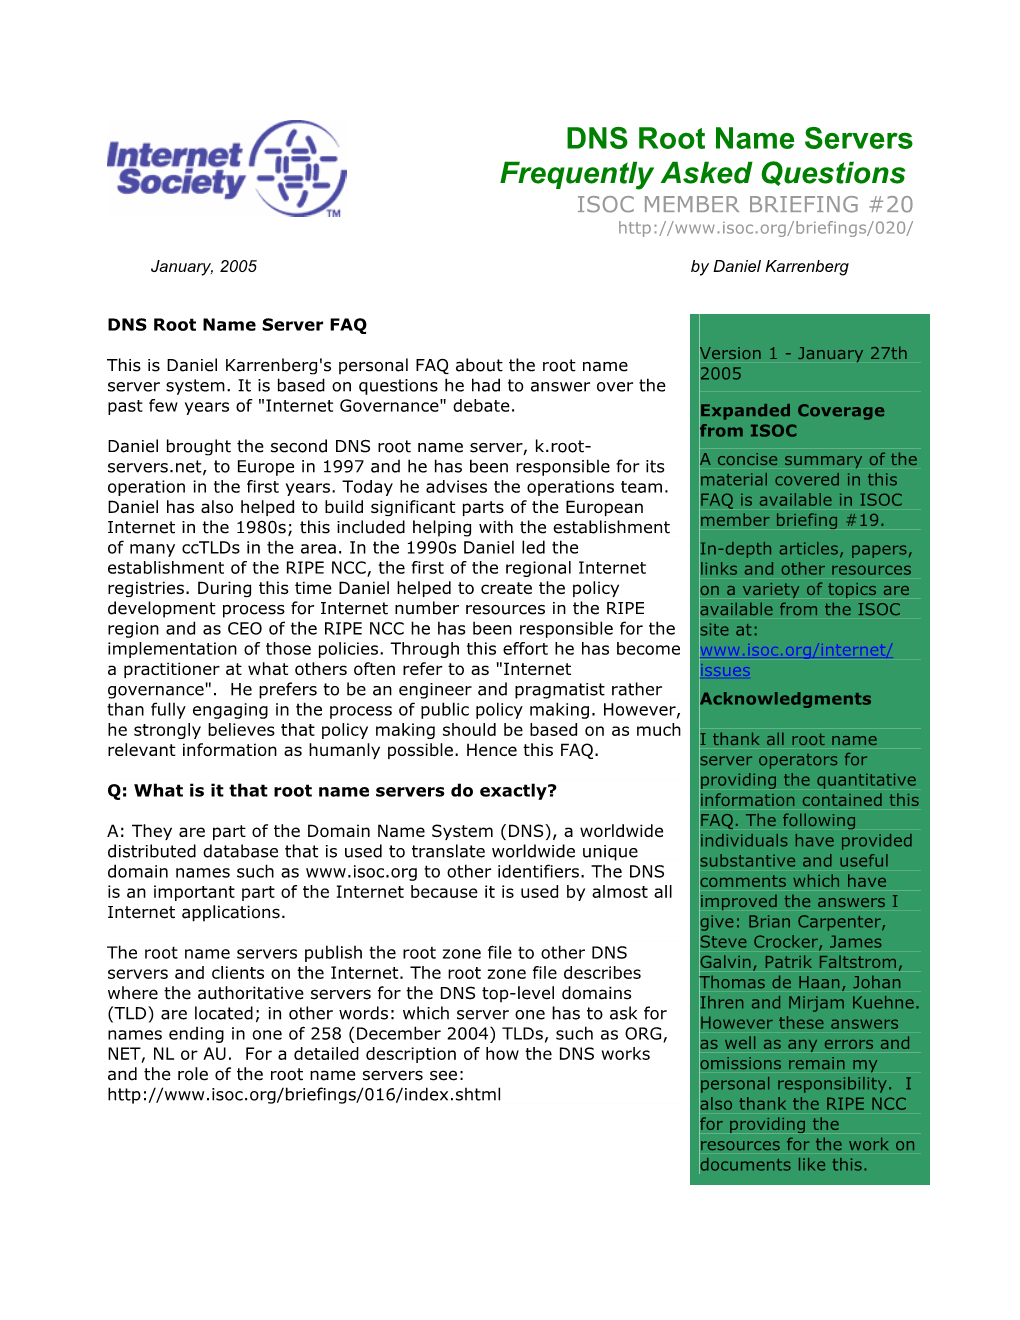 DNS Root Name Servers Frequently Asked Questions ISOC MEMBER BRIEFING #20